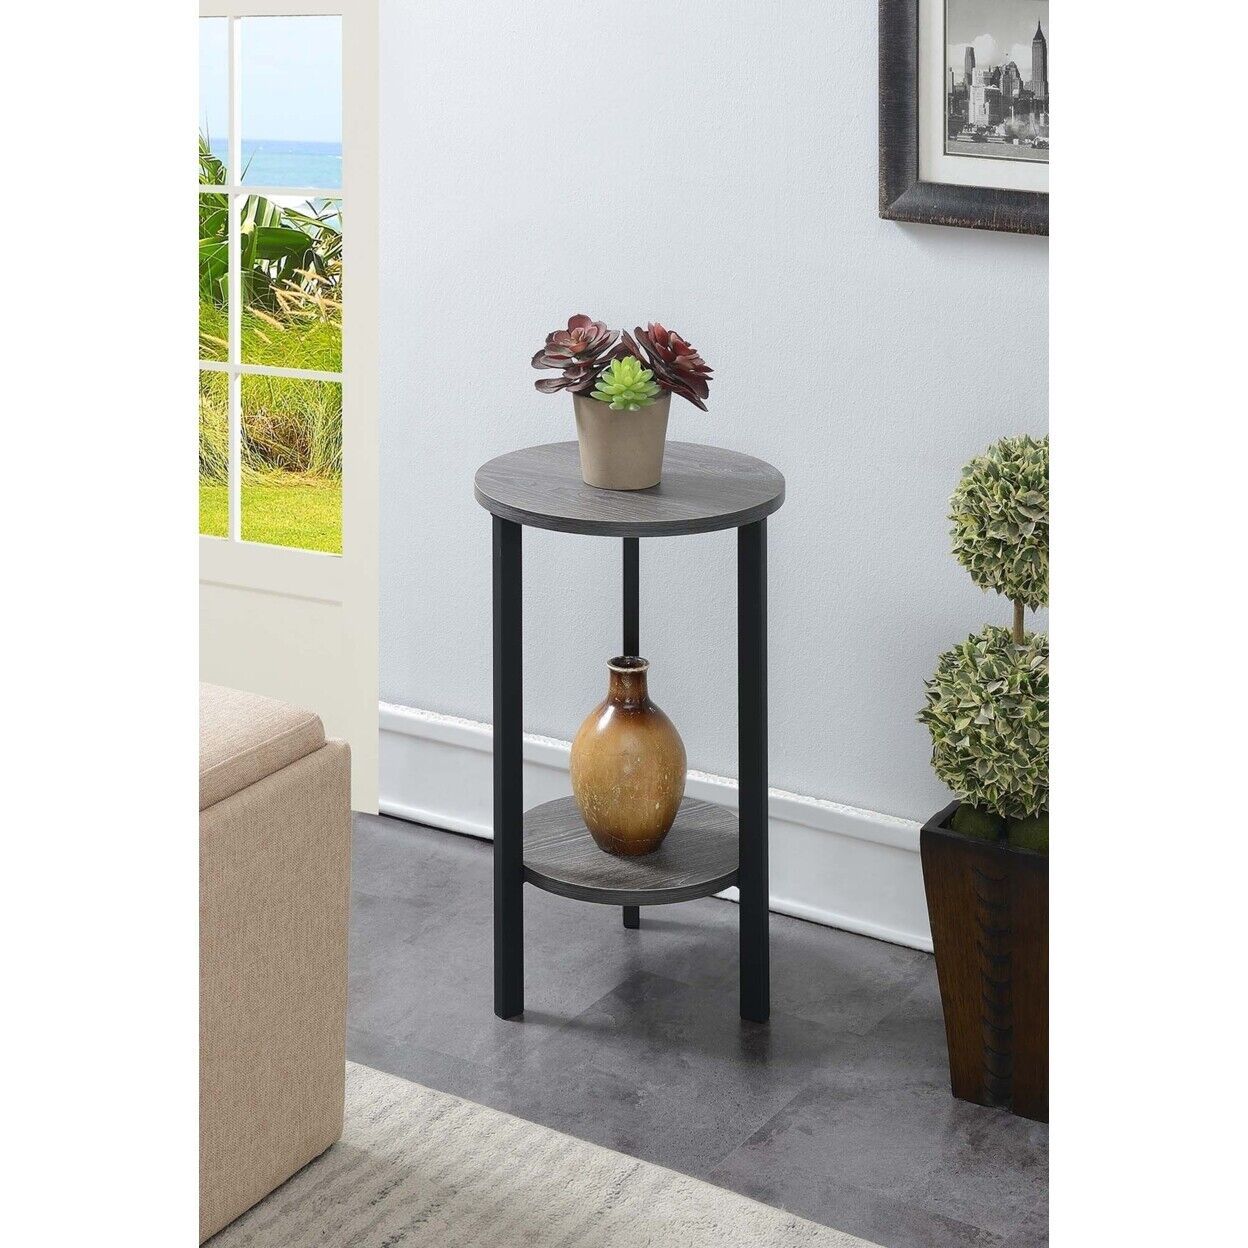 Graystone 24 Inch Plant Stand, Weathered Gray 95285427154 | Ebay In 24 Inch Plant Stands (View 5 of 15)